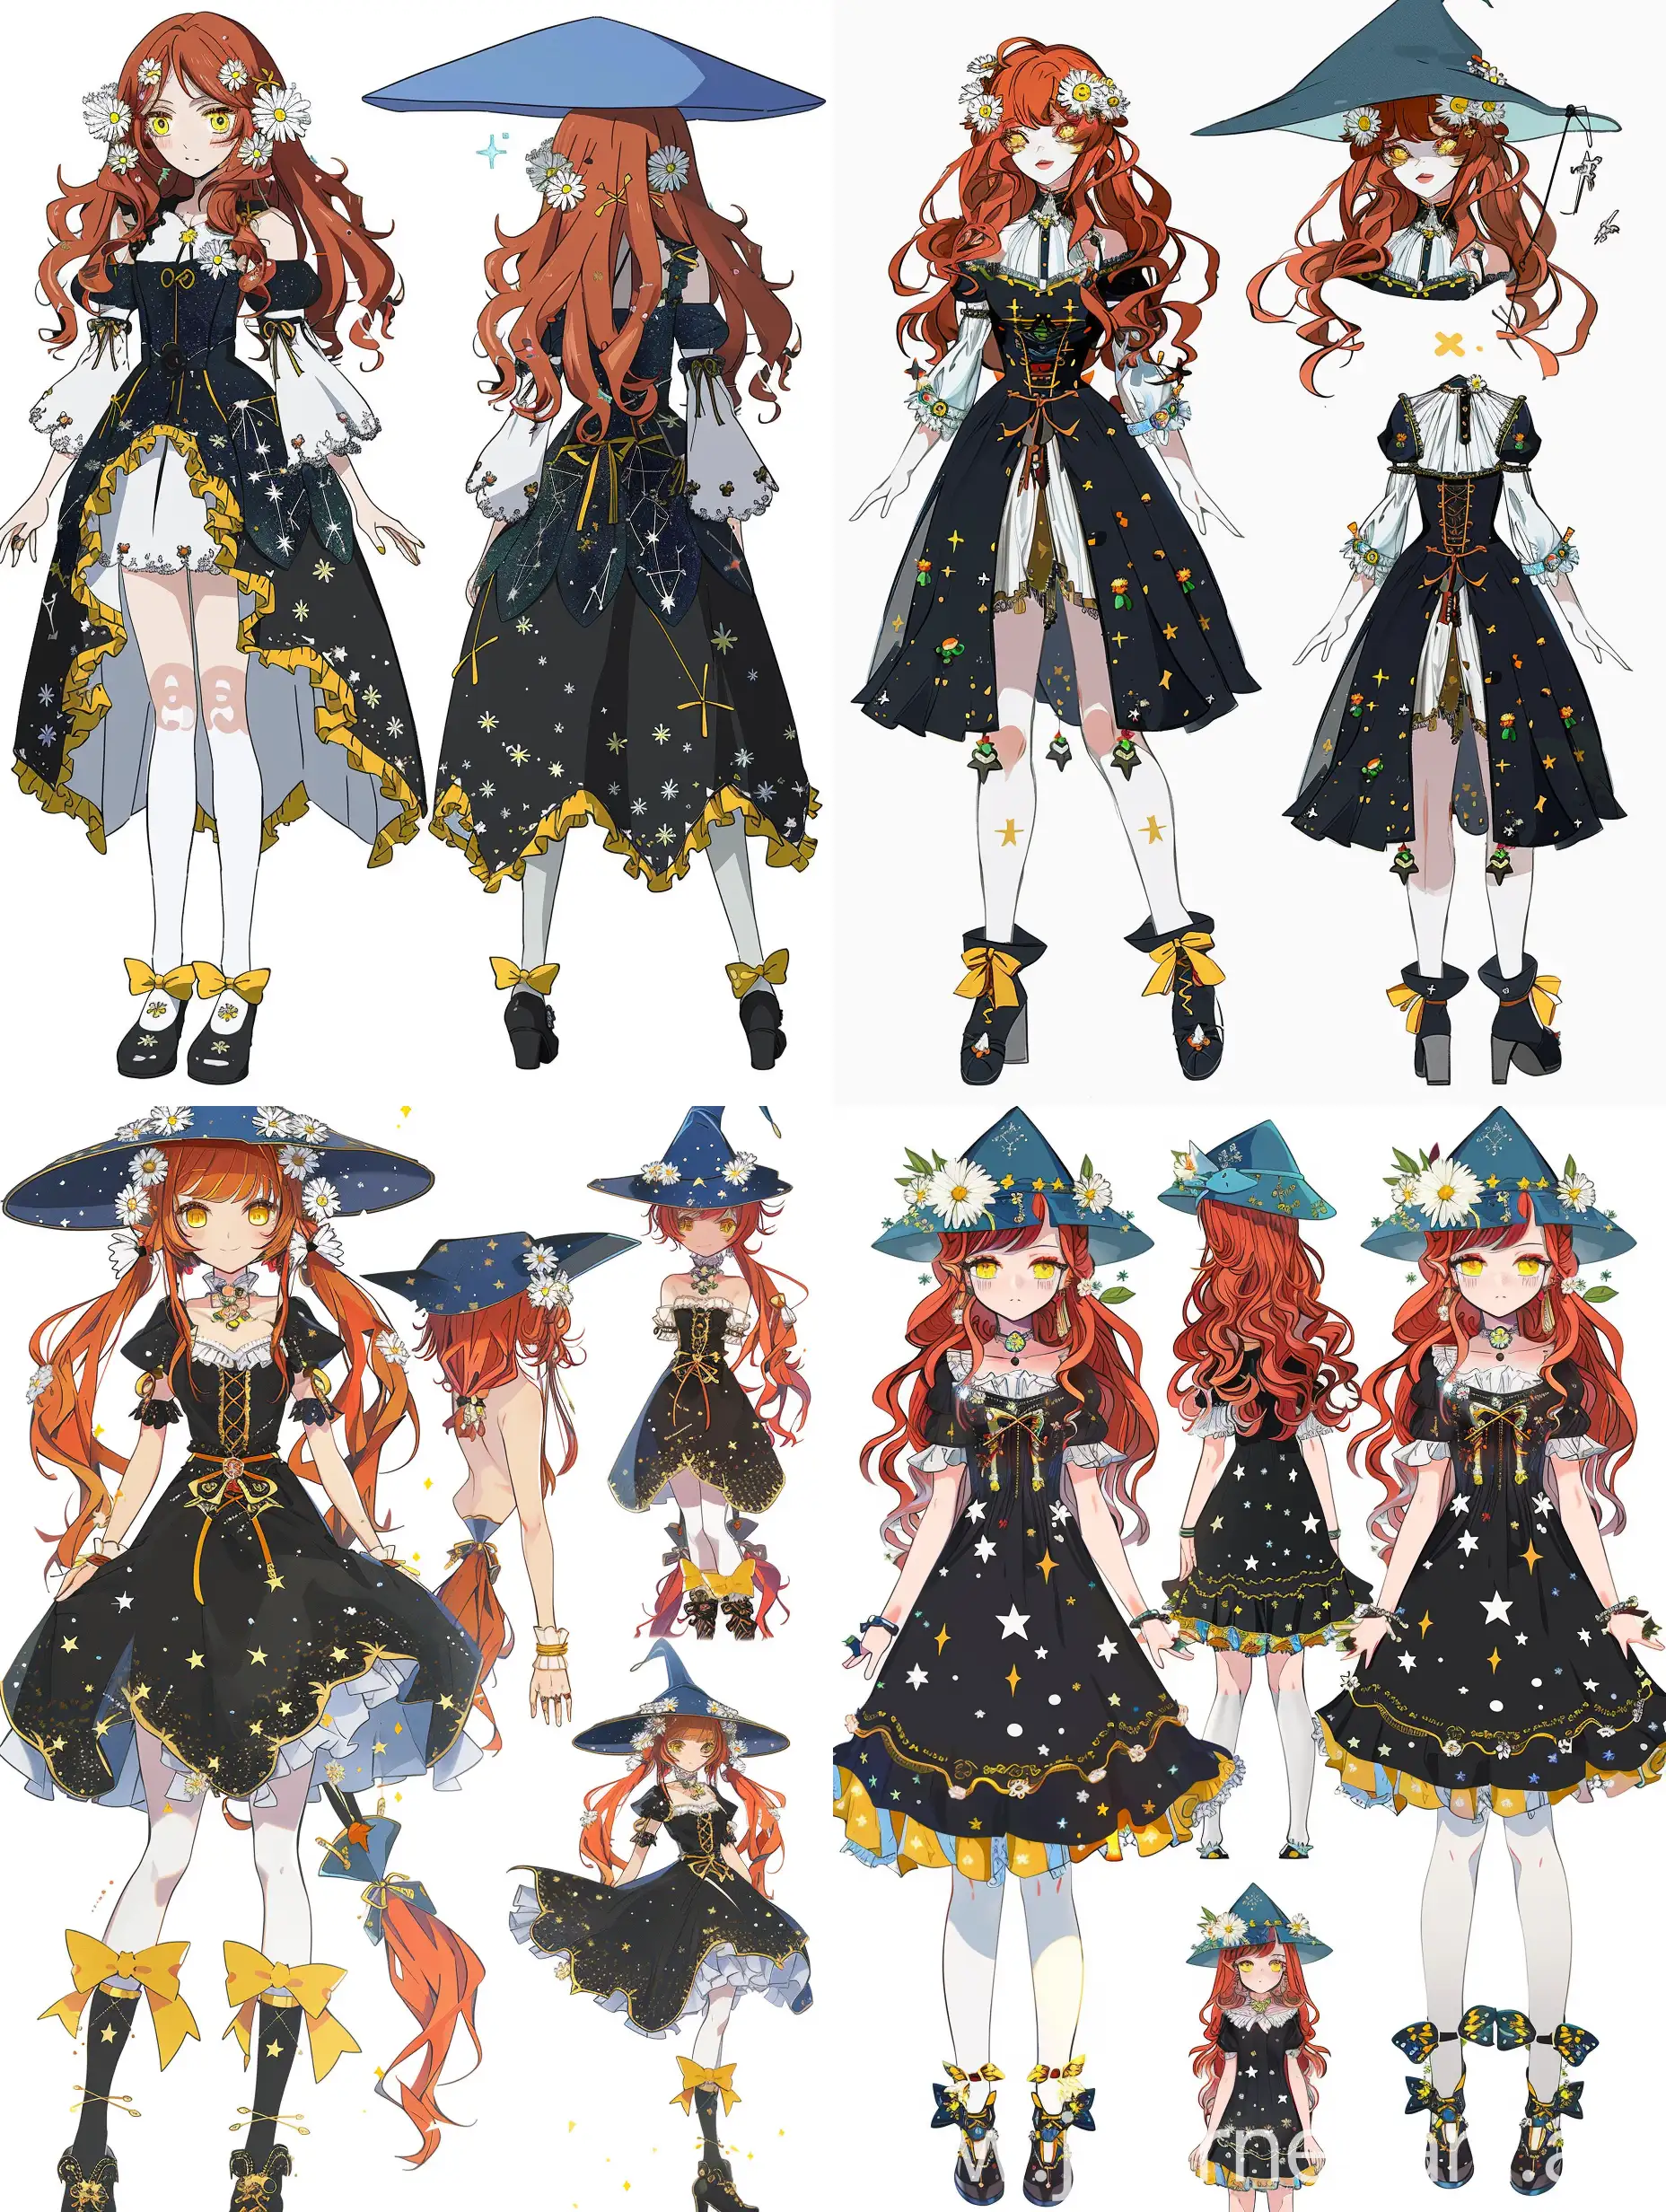 anime girl, multiple views, standing in full height, wavy red hair, daisies in her hair, yellow eyes, black medieval dress with stars in a fantasy style, white tights, black shoes with yellow bows, conical blue hat.